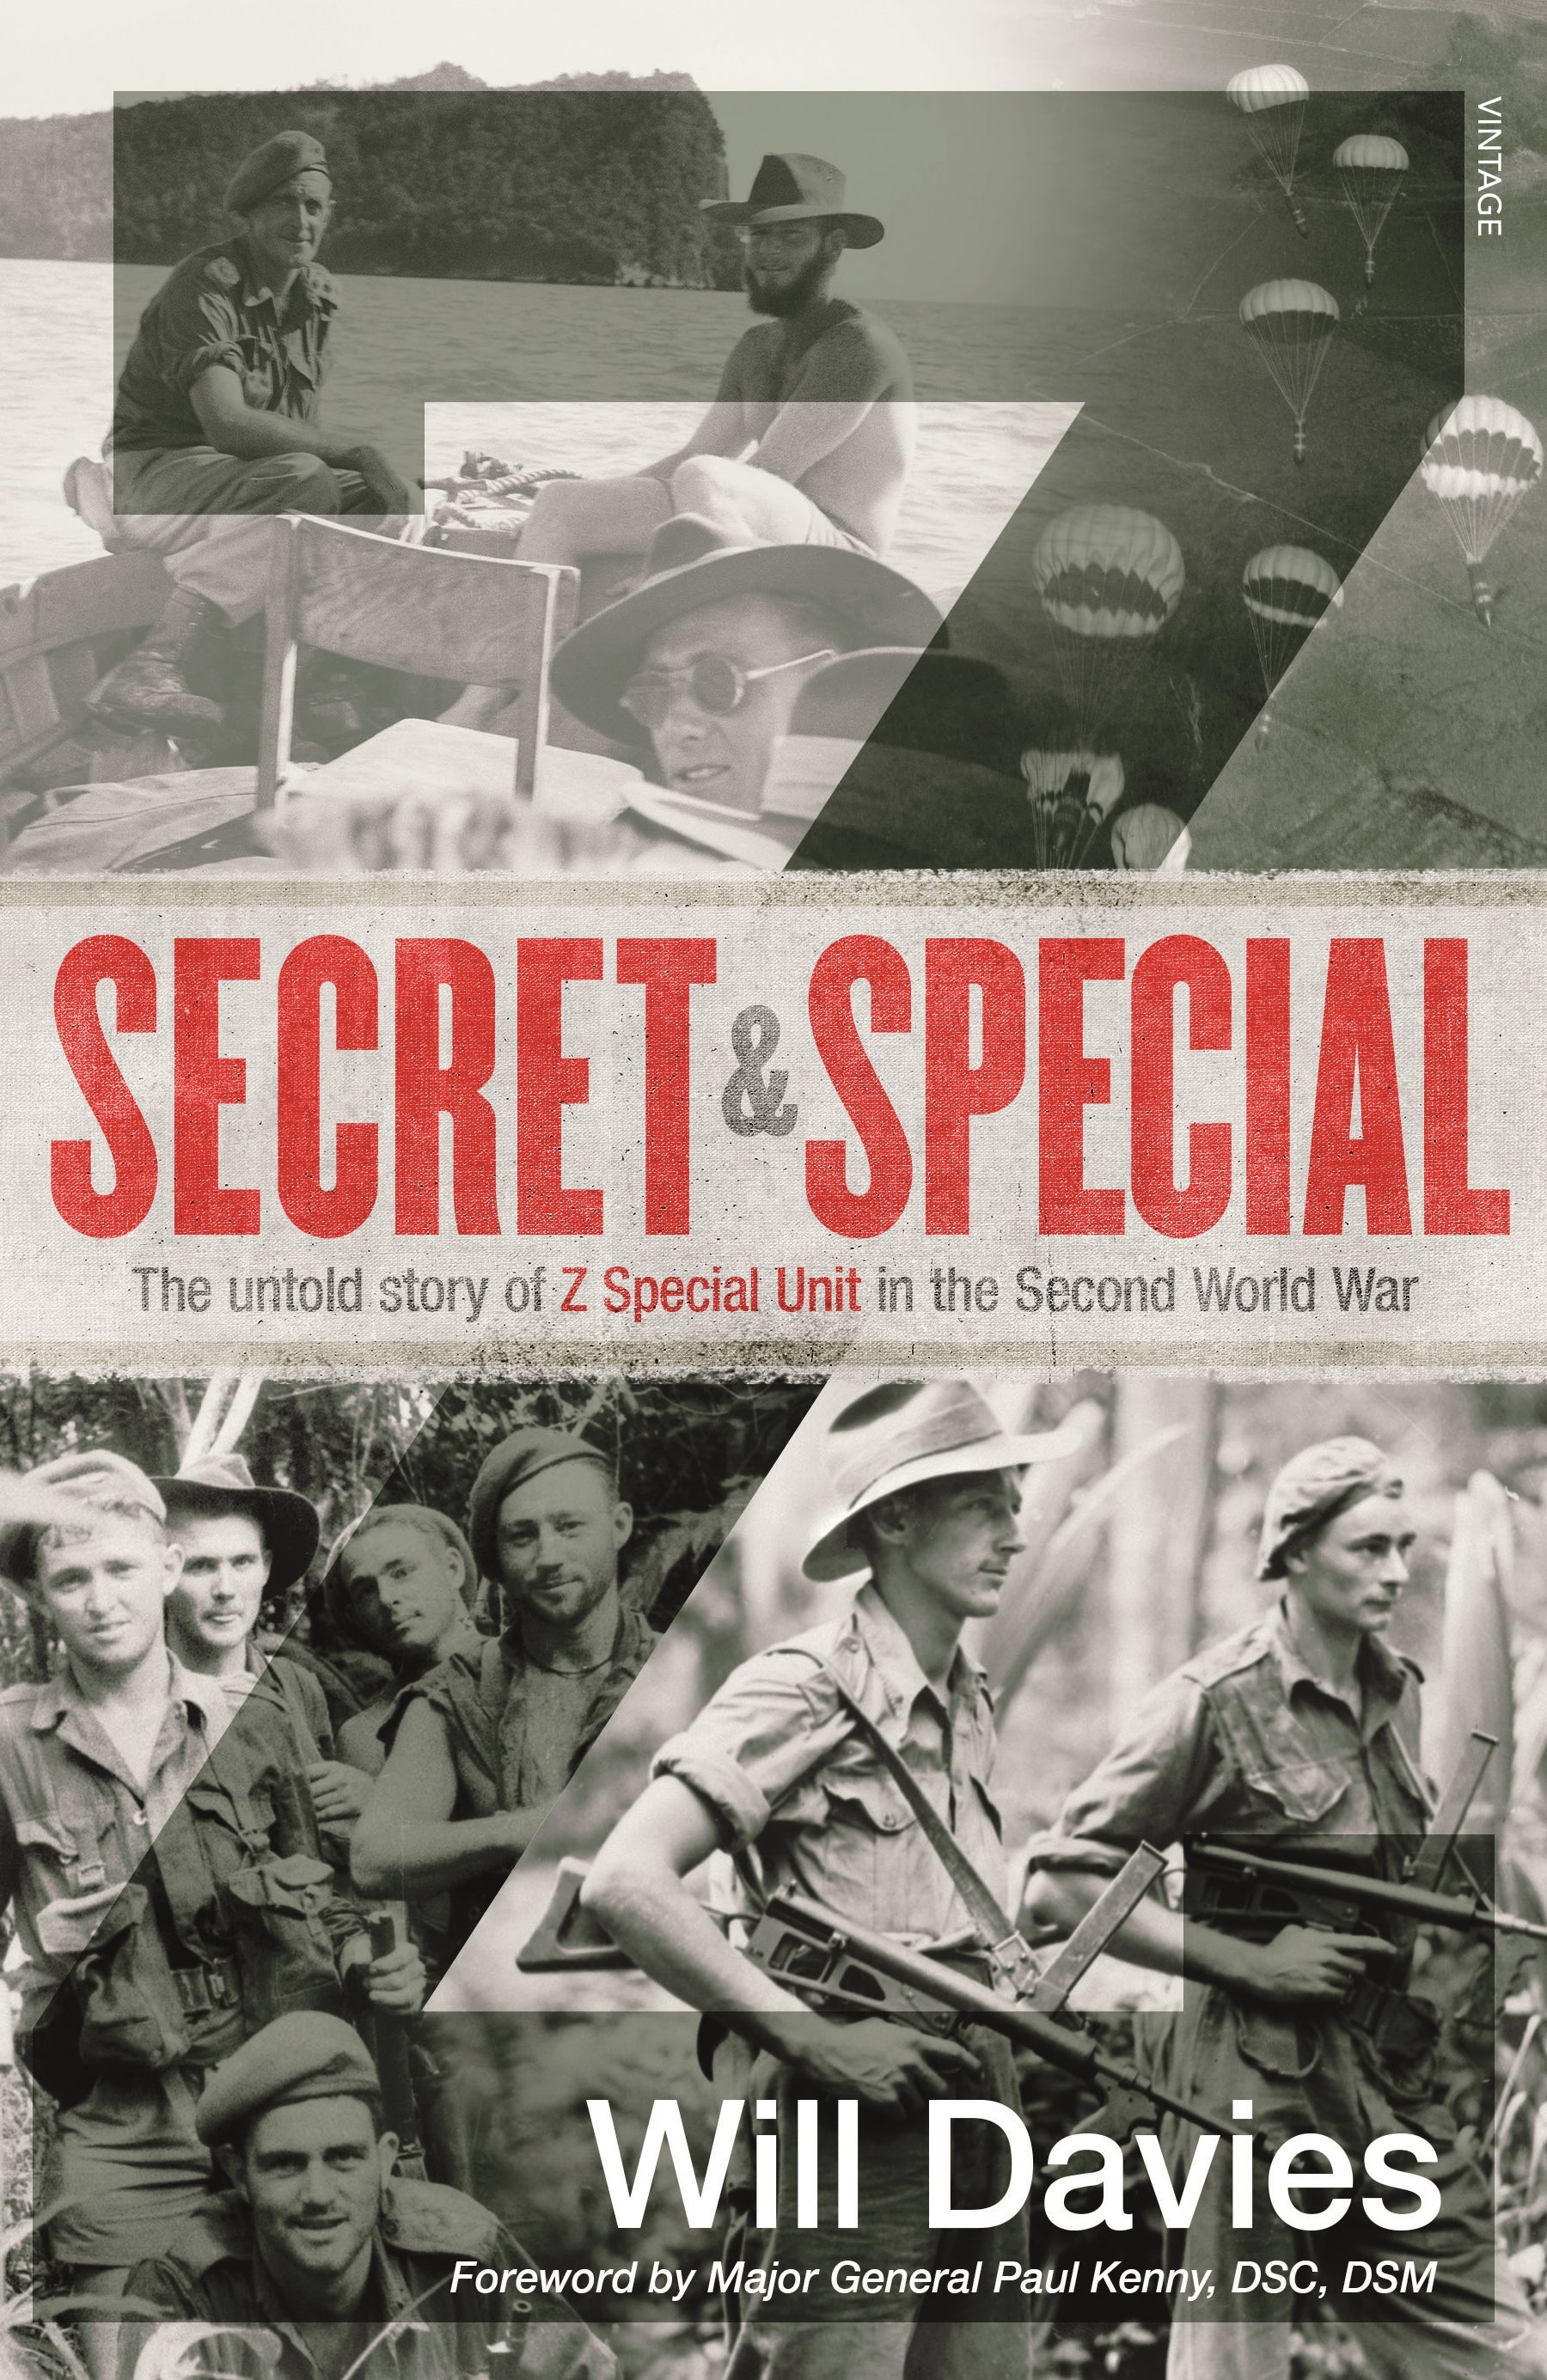 Secret and special: The untold story of Z Special Unit in the Second World War